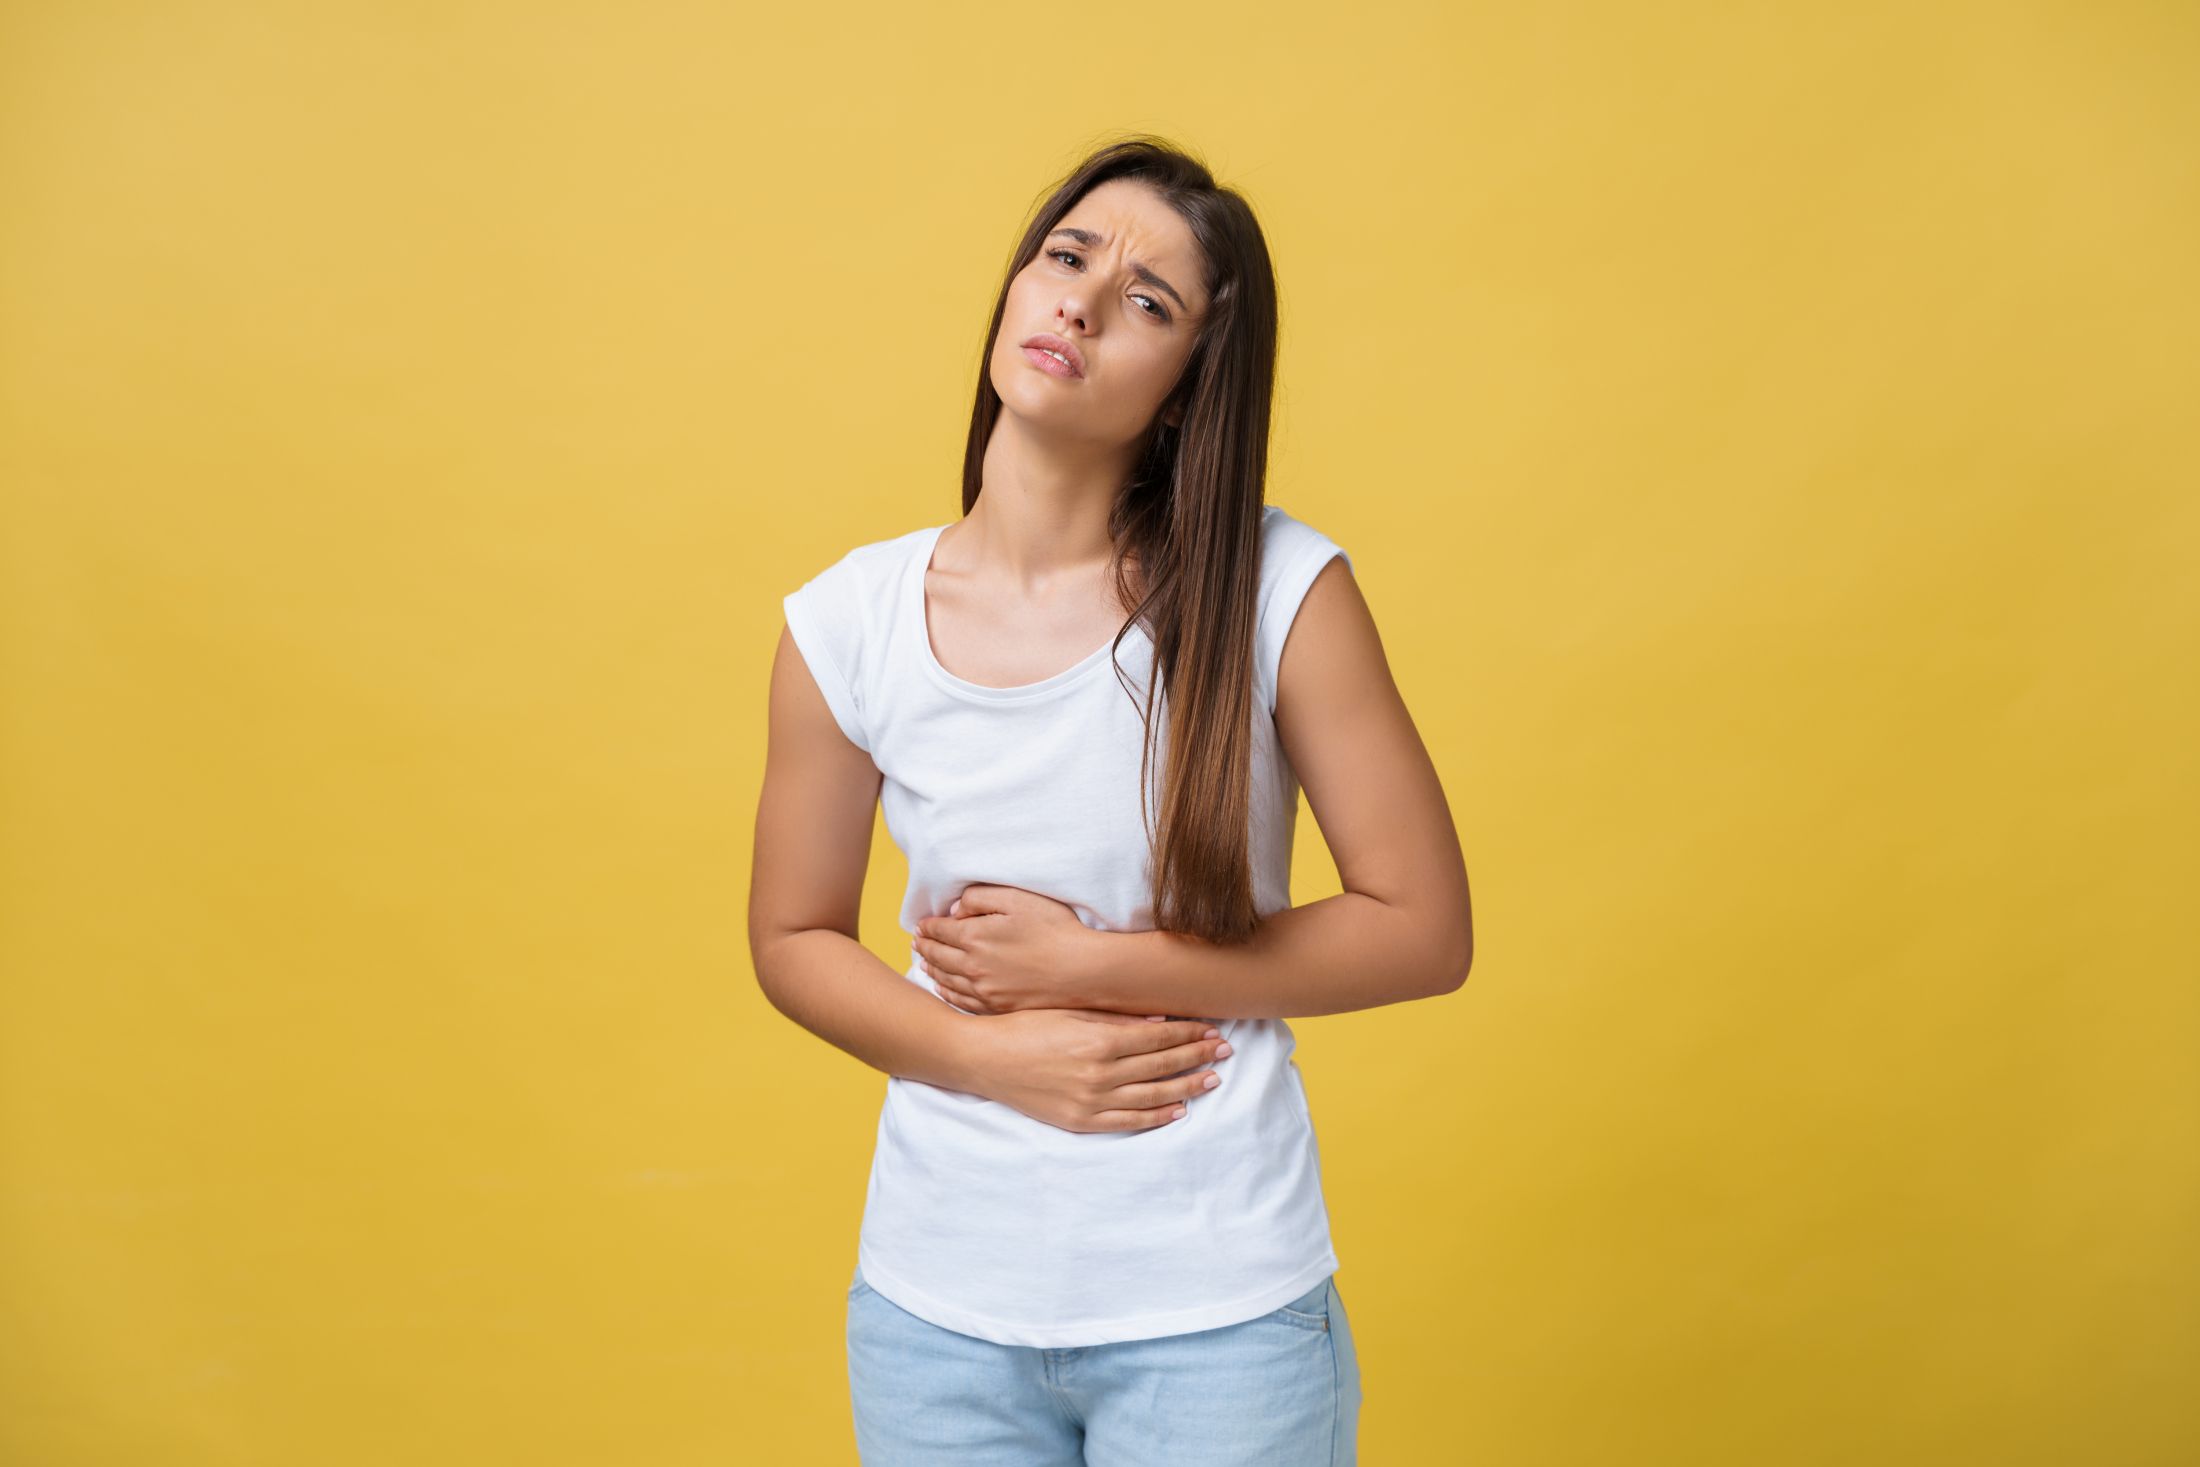 indoor-portrait-of-cute-girl-standing-with-crossed-hands-on-belly-feeling-awkward-or-suffering-from-pain-while-looking-aside-standing-against-yellow-background-woman-has-stomachache.jpg